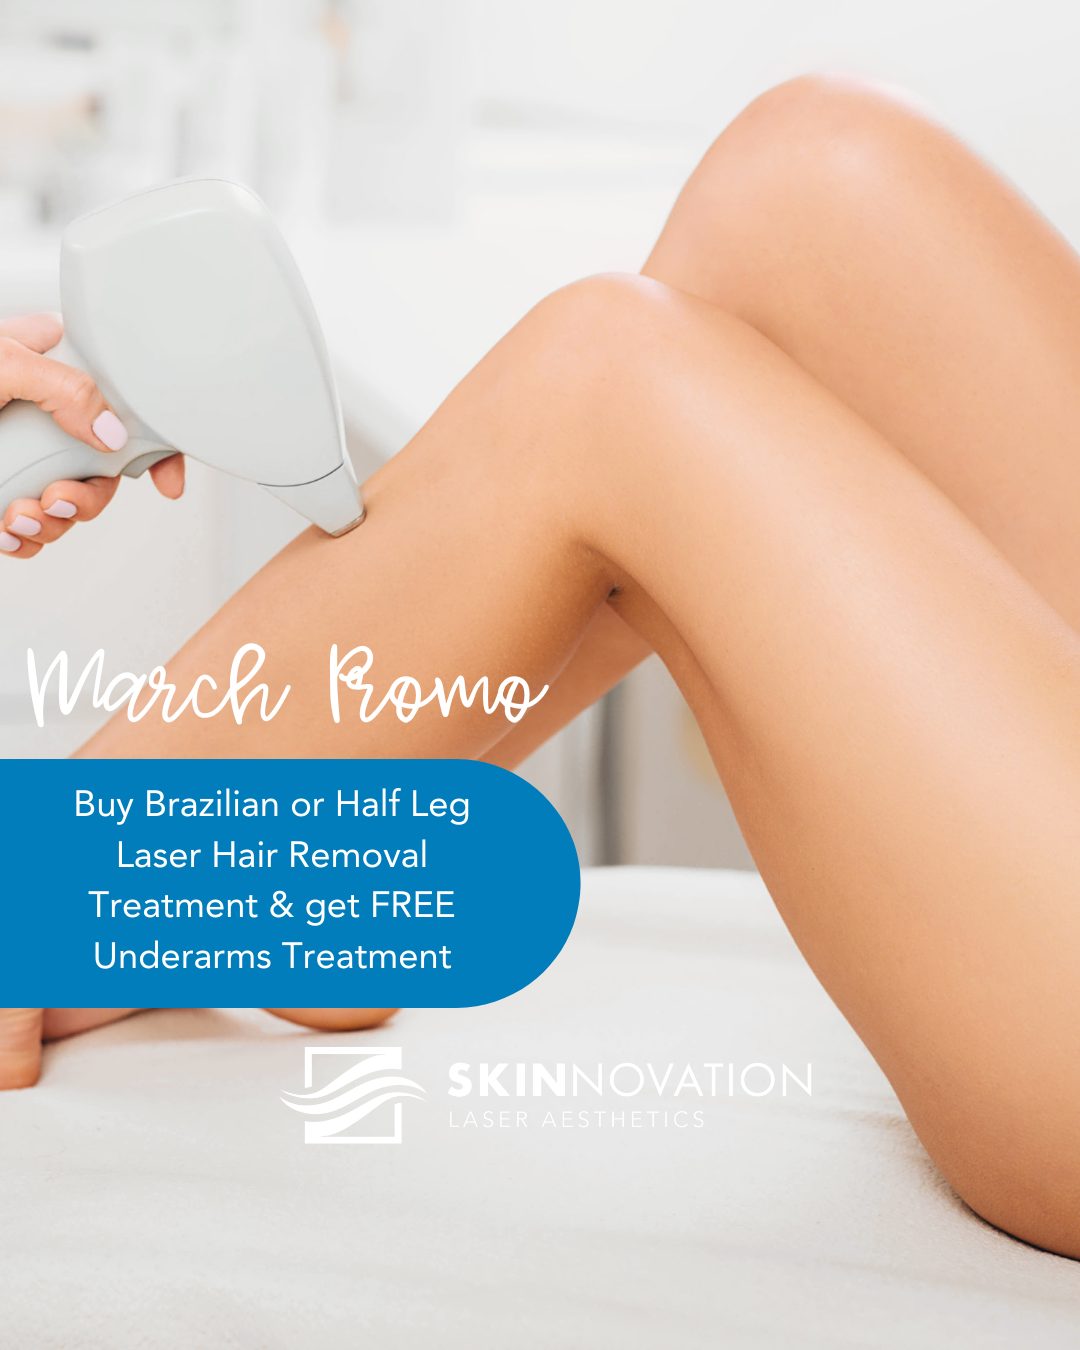 March Promo Laser Hair Removal